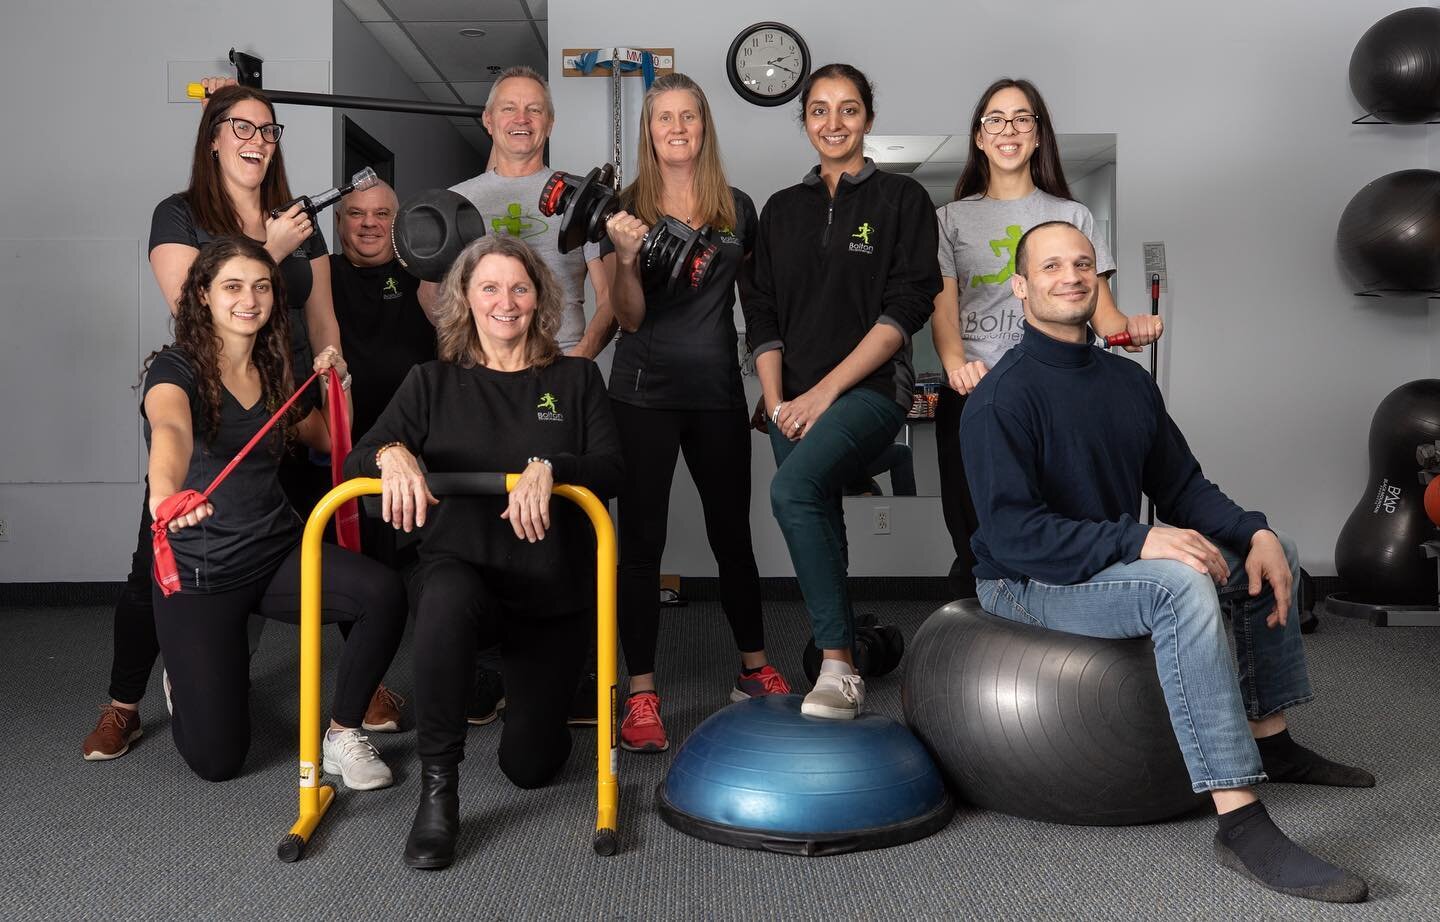 The Bolton Physio crew is coming in HOT this year for the Caledon Readers Choice Award. 🥵 

Nominate our team members in the Best Massage Therapist, Best Physiotherapist and our business in Best Massage Therapy Service, Best Physiotherapy Services a